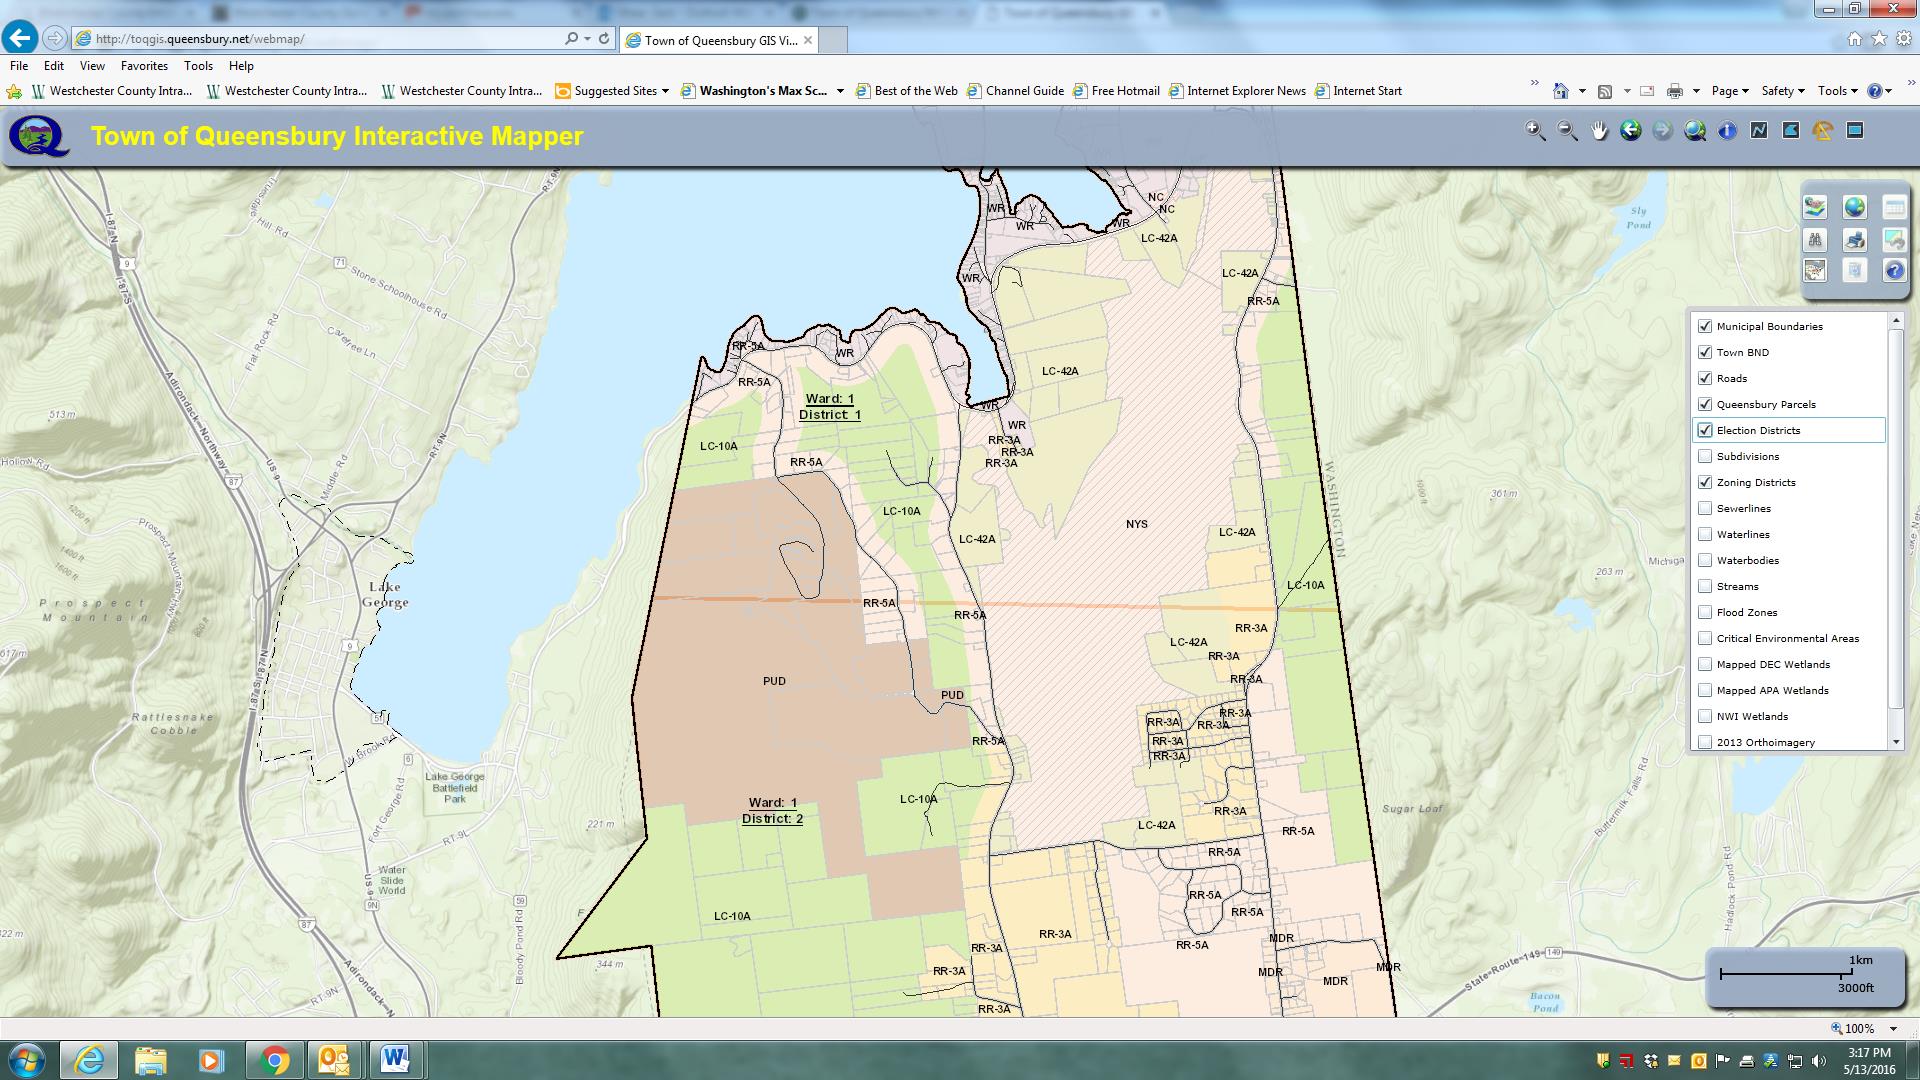 Parts of the Town of Queensbury is actually within the Adirondack Park and therefore subject to stringent land use regulations. This image highlights zoning districts on the southeastern shore of Lake George – within the park boundaries.